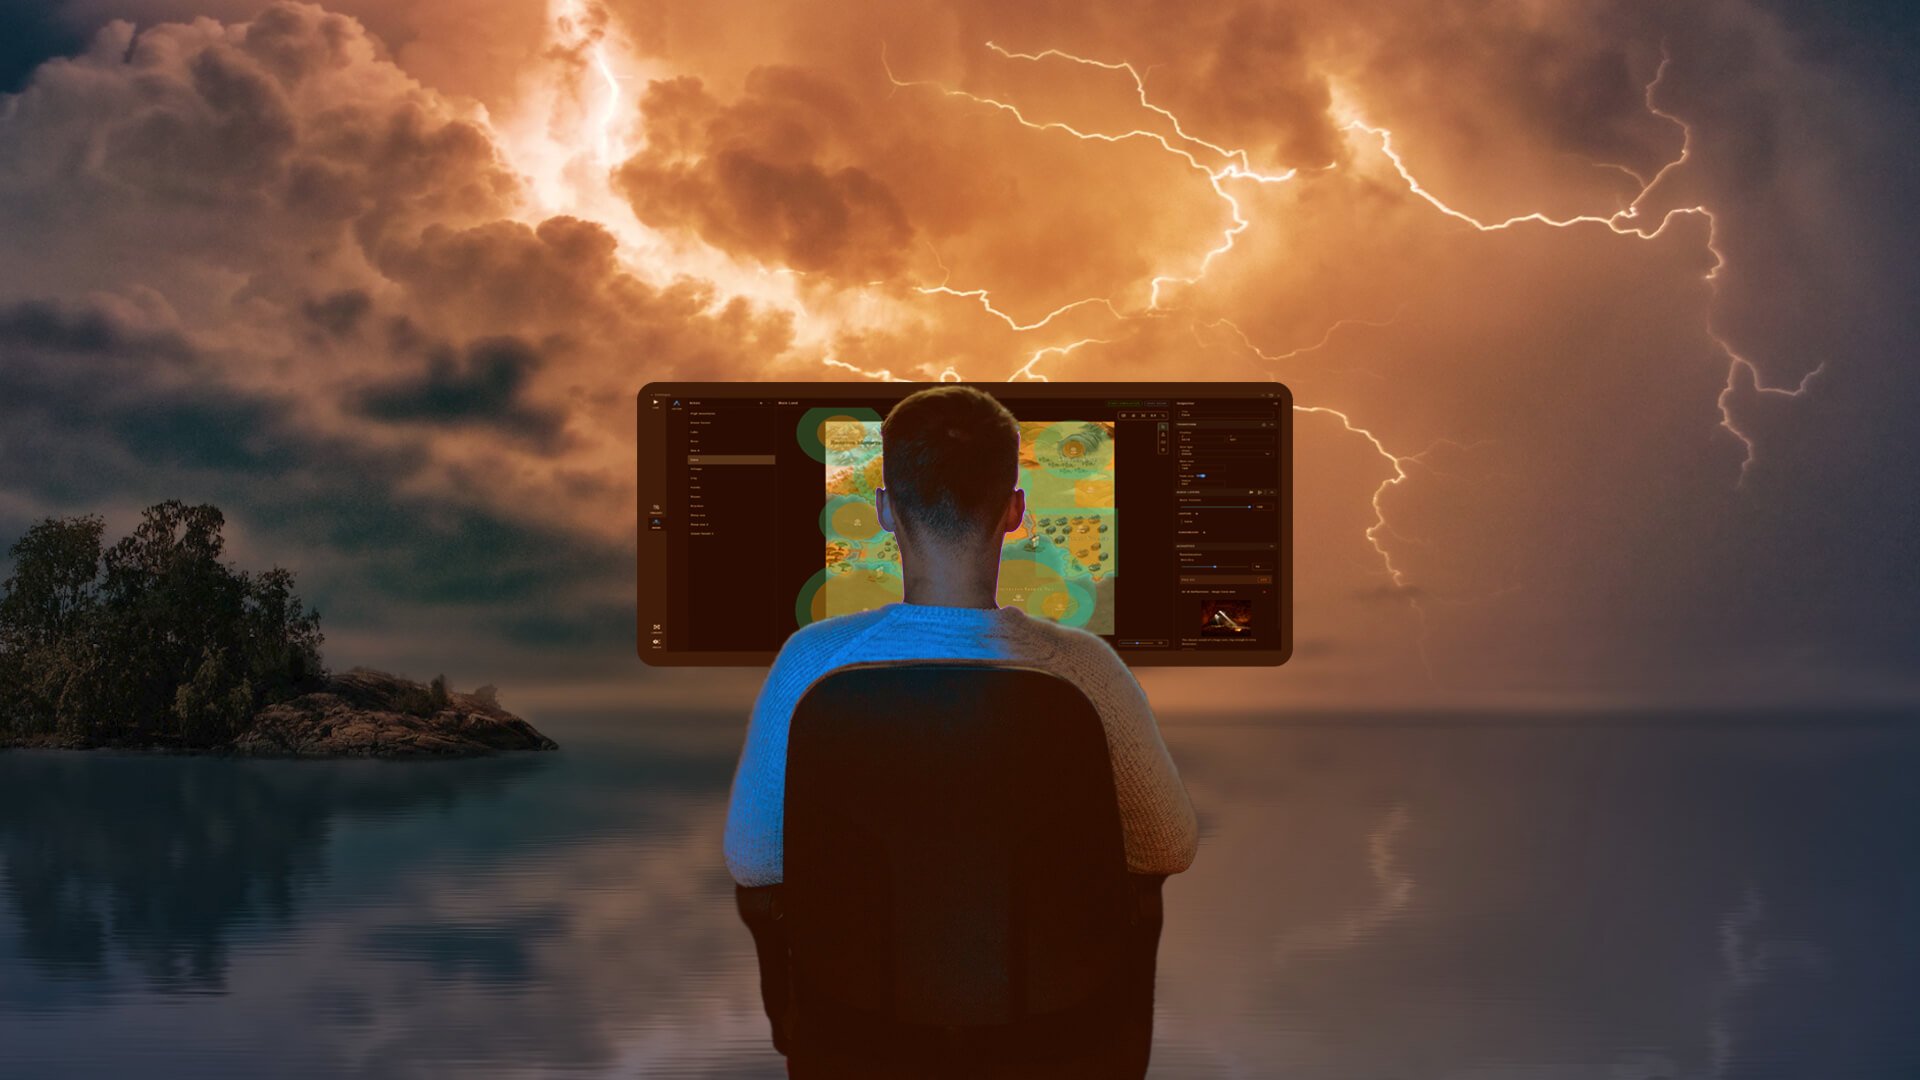 A photographic composition showing a sound designer working on the Echotopia soundscape design application, with an island and sea background with lightning on a cloudy sky.